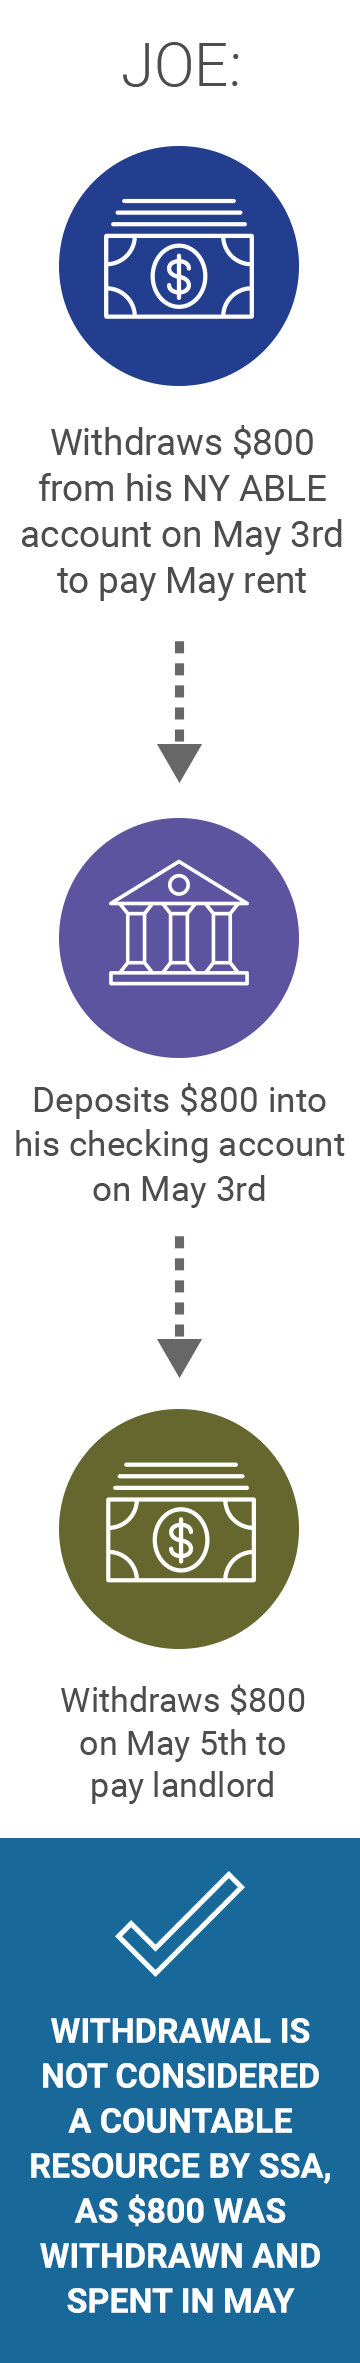 Joe’s scenario begins with his withdrawal of $800 from his NY ABLE account on May 3rd to pay May rent. Joe then deposits $800 into his checking account on May 3rd. Finally, he withdraws $800 on May 5th to pay his landlord. Big blue “checkmark” icon signifies that this is NOT considered a countable resource by SSA, as $800 was withdrawn and spent in May.